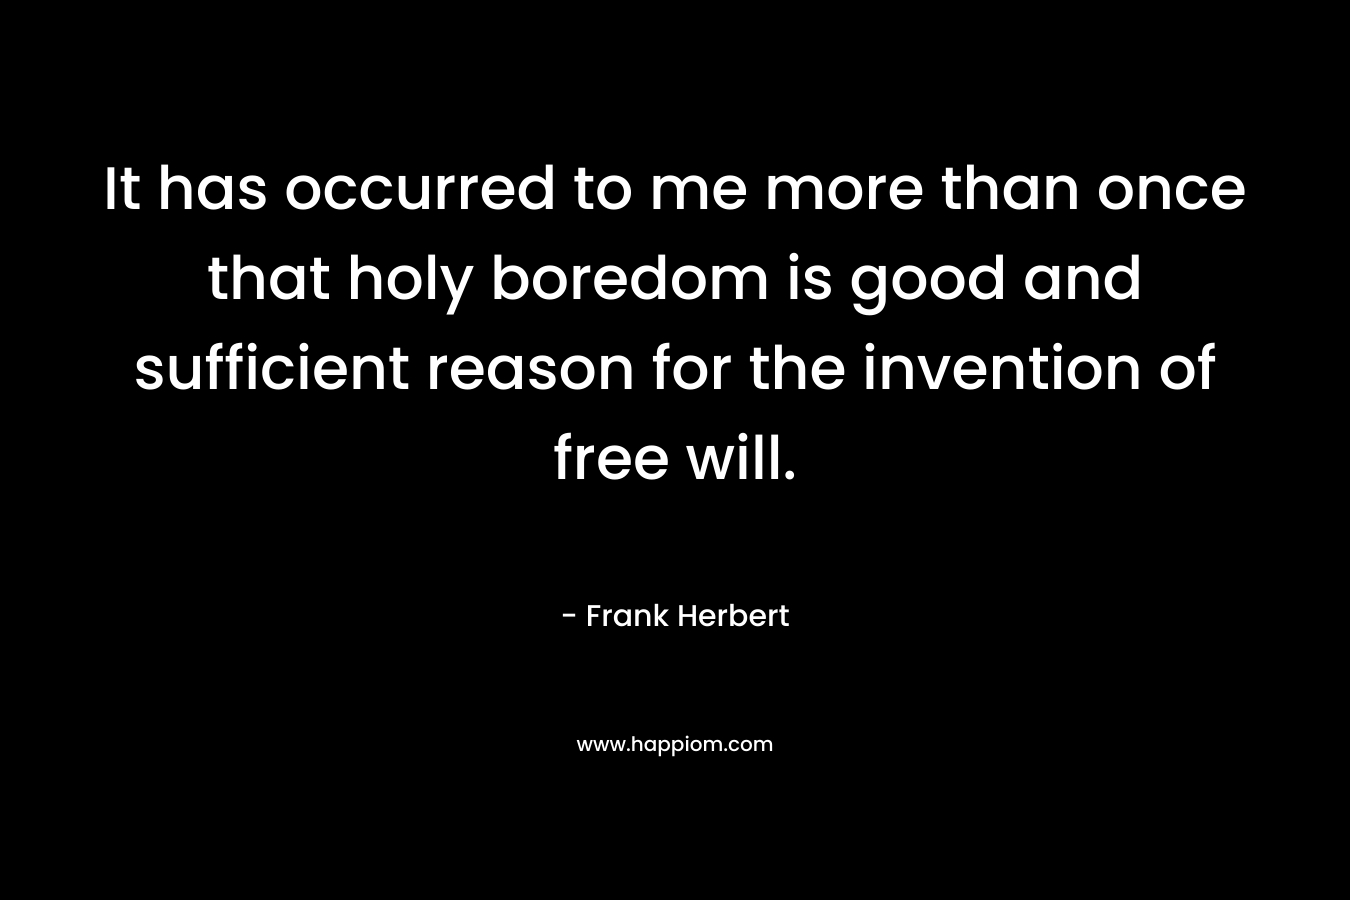 It has occurred to me more than once that holy boredom is good and sufficient reason for the invention of free will.